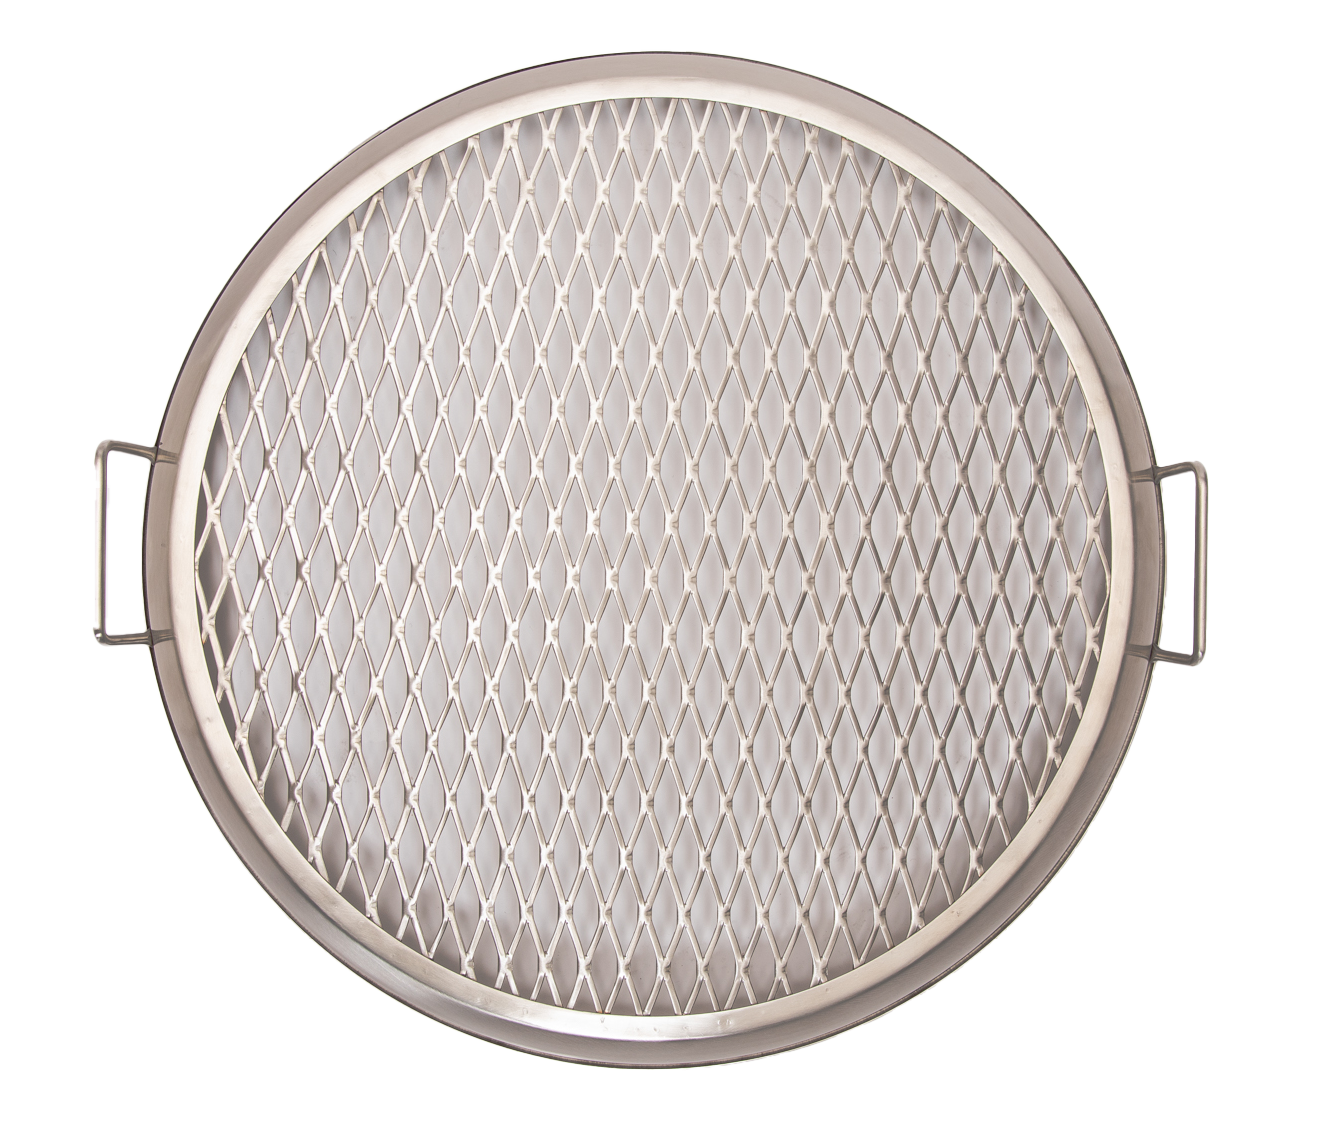 19” Universal Grill Grate-<i>Stainless Steel</i>